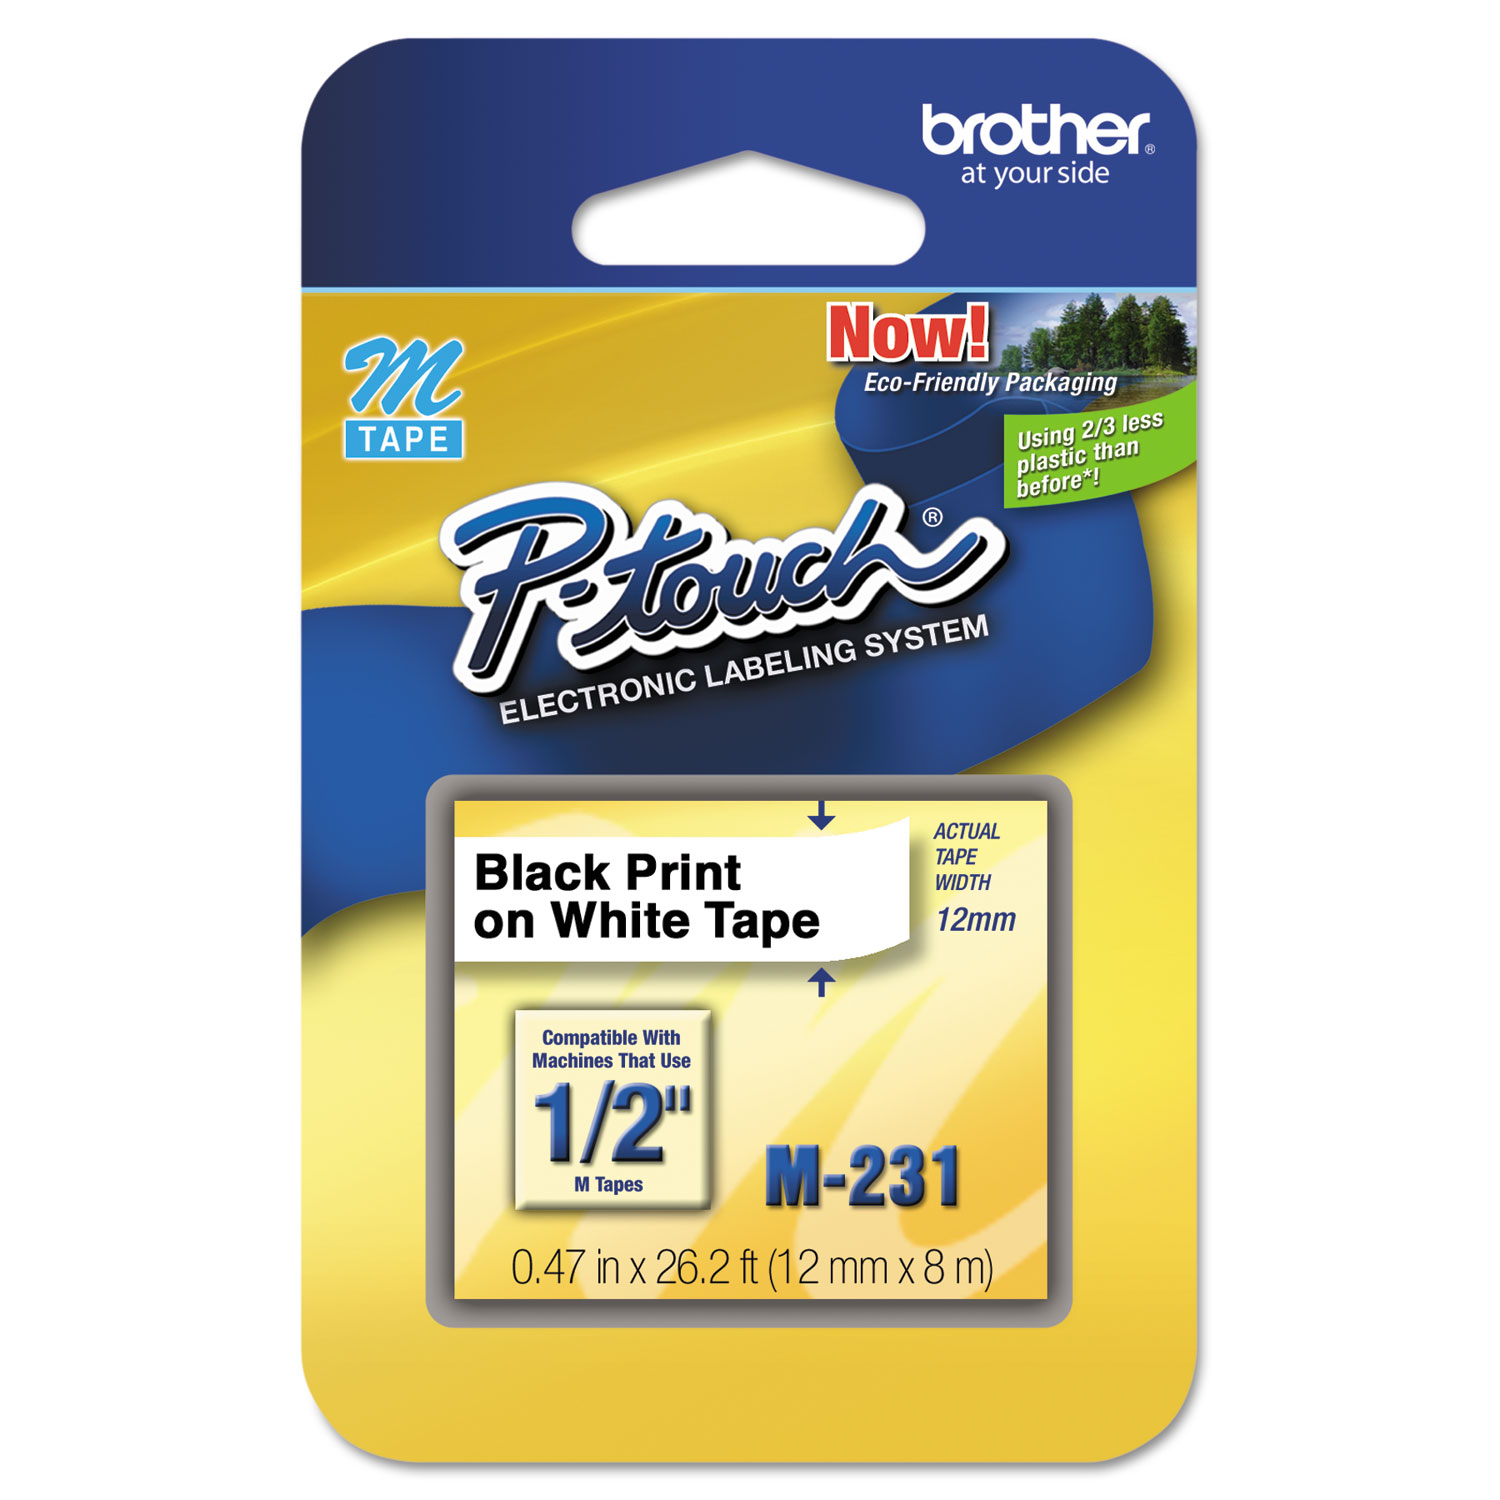  Brother P-Touch M231 M Series Tape Cartridge for P-Touch Labelers, 0.47 x 26.2 ft, Black on White (BRTM231) 